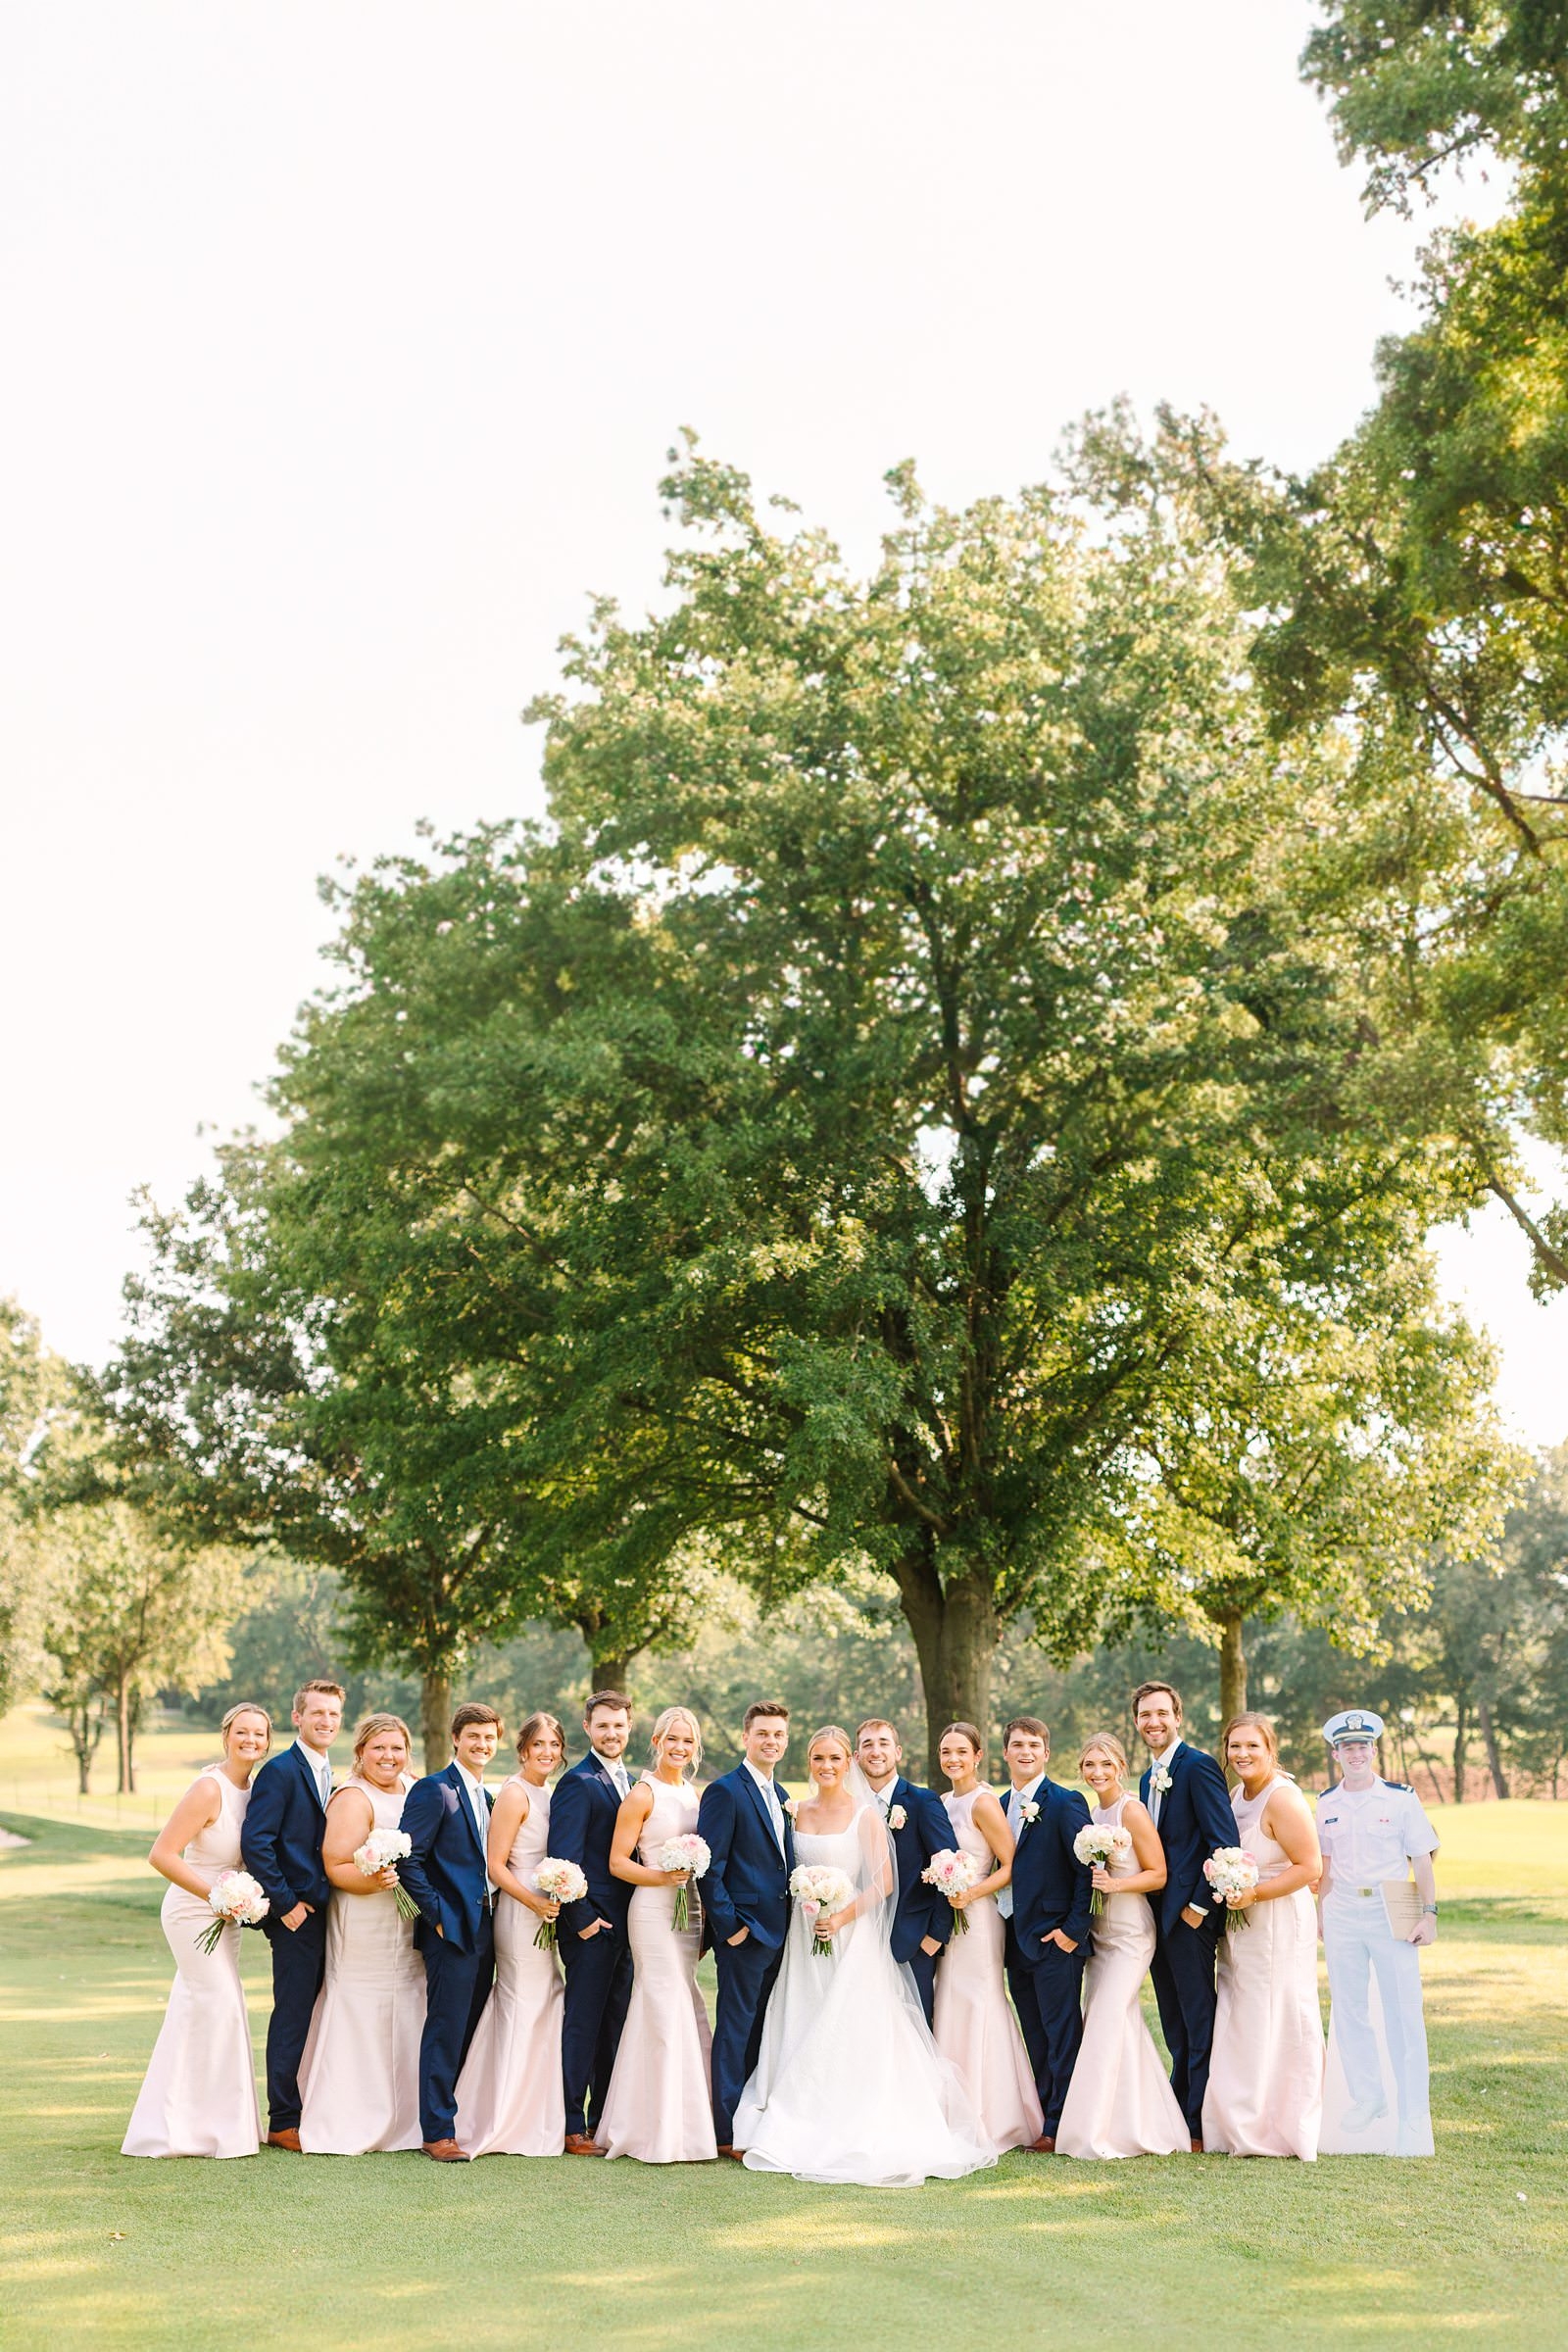 An Evansville Country Club Wedding | Ashley and Beau | Bret and Brandie Photography180.jpg